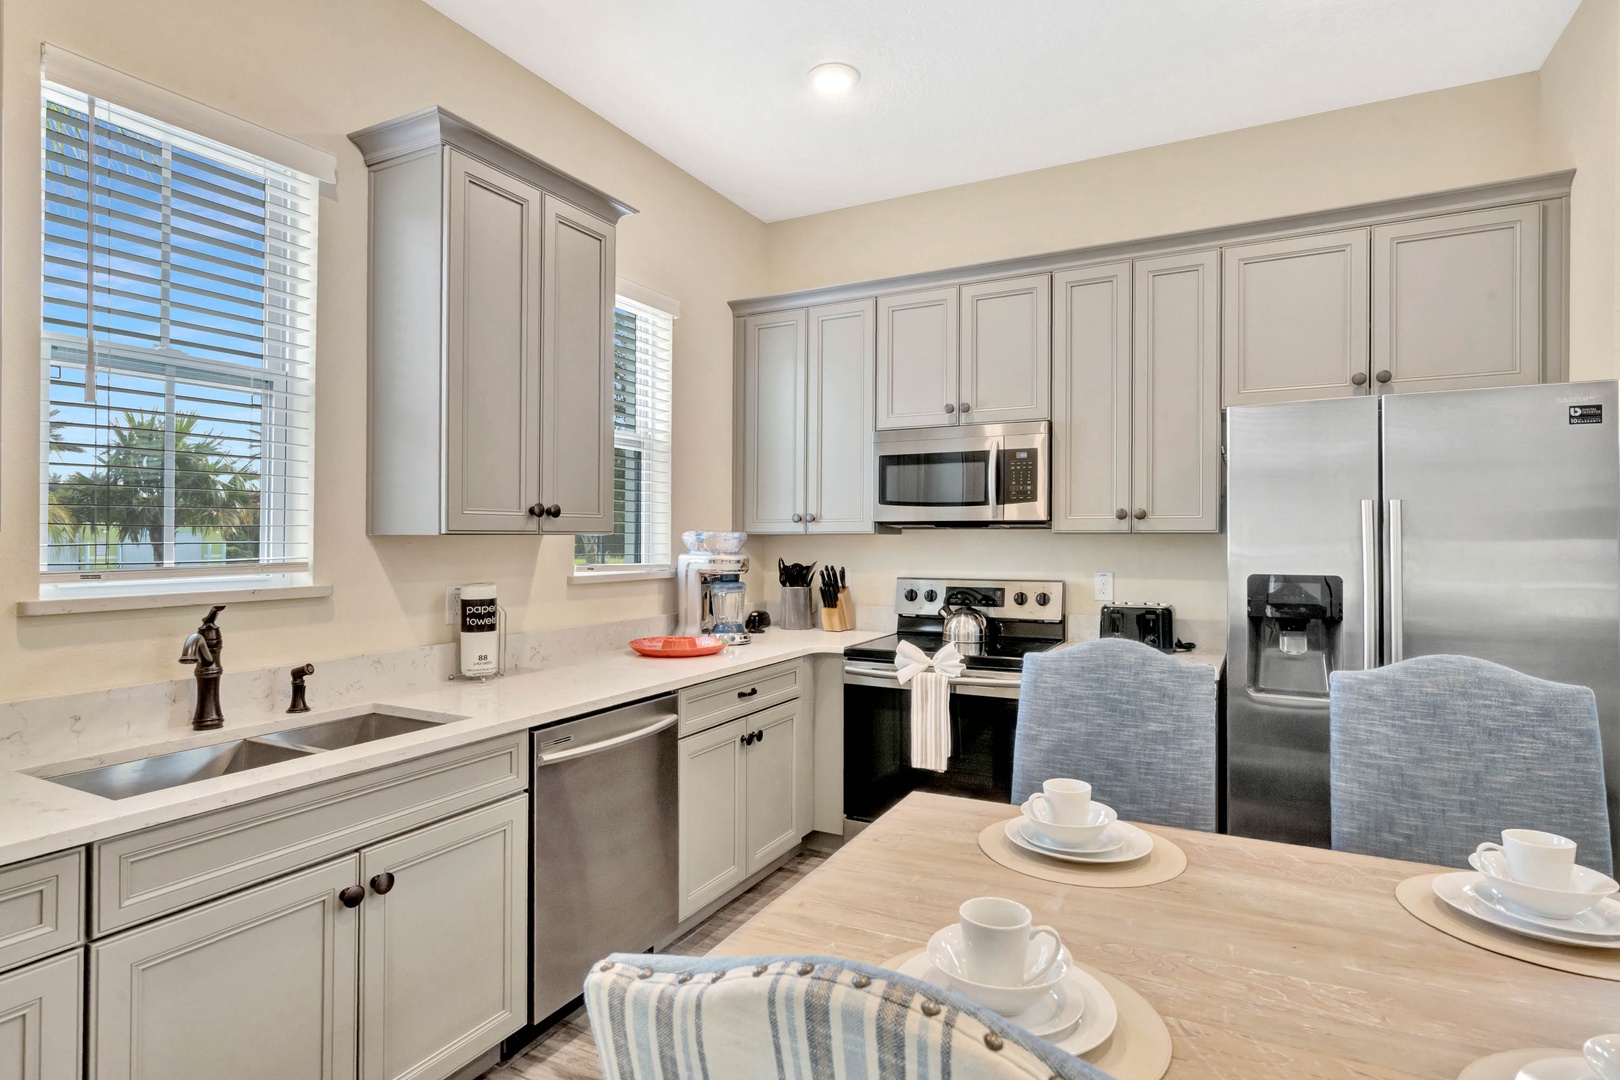 Kitchen equipped with stainless steel appliances and all the tools you’ll need to make delicious meals from home